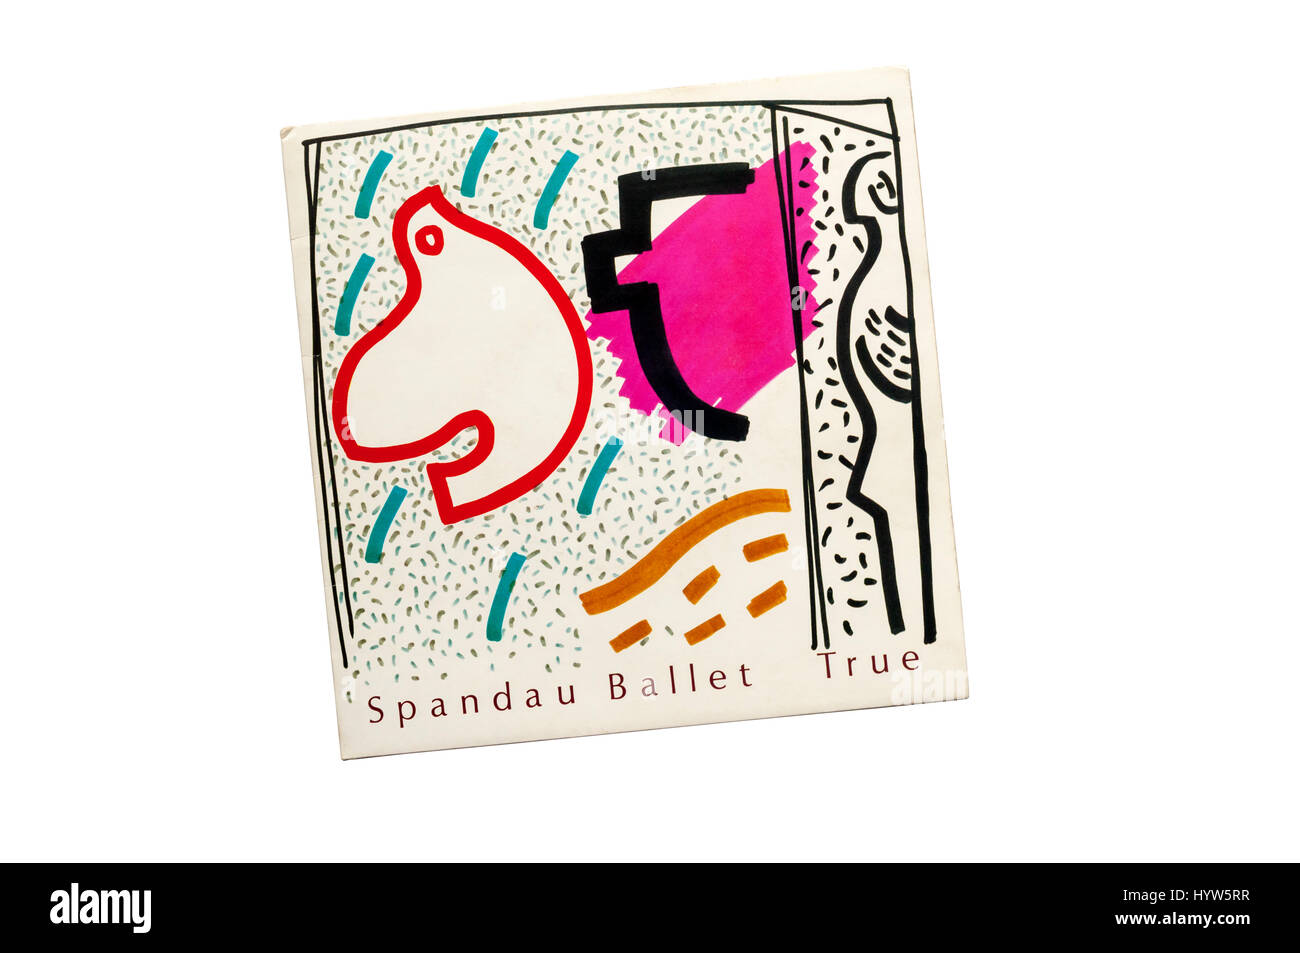 1983 7' single, True by Spandau Ballet.  Cover features design by David Band. Stock Photo